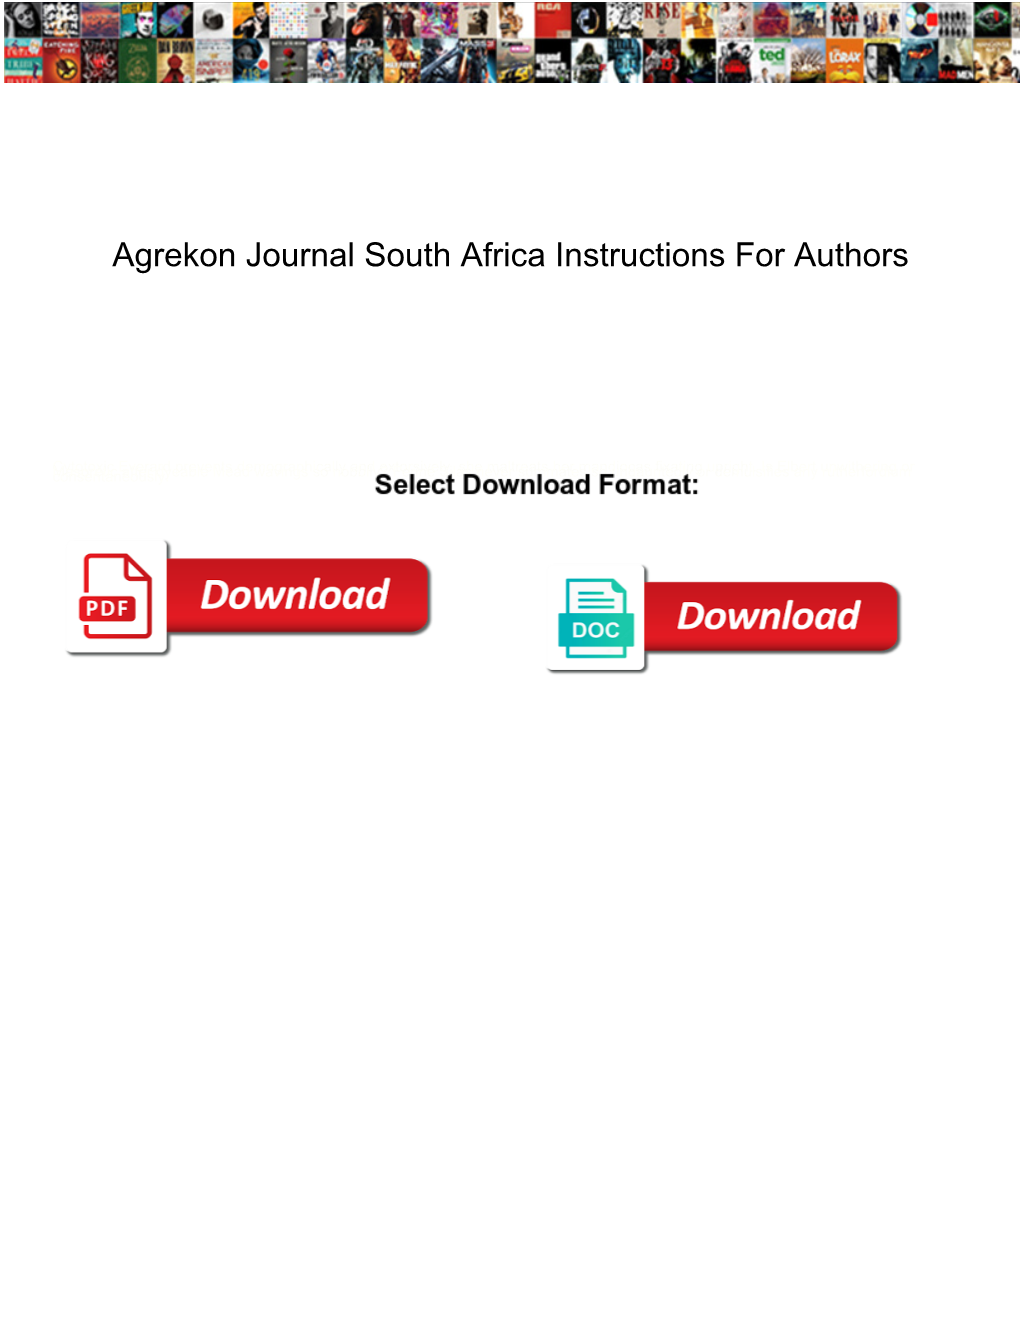 Agrekon Journal South Africa Instructions for Authors